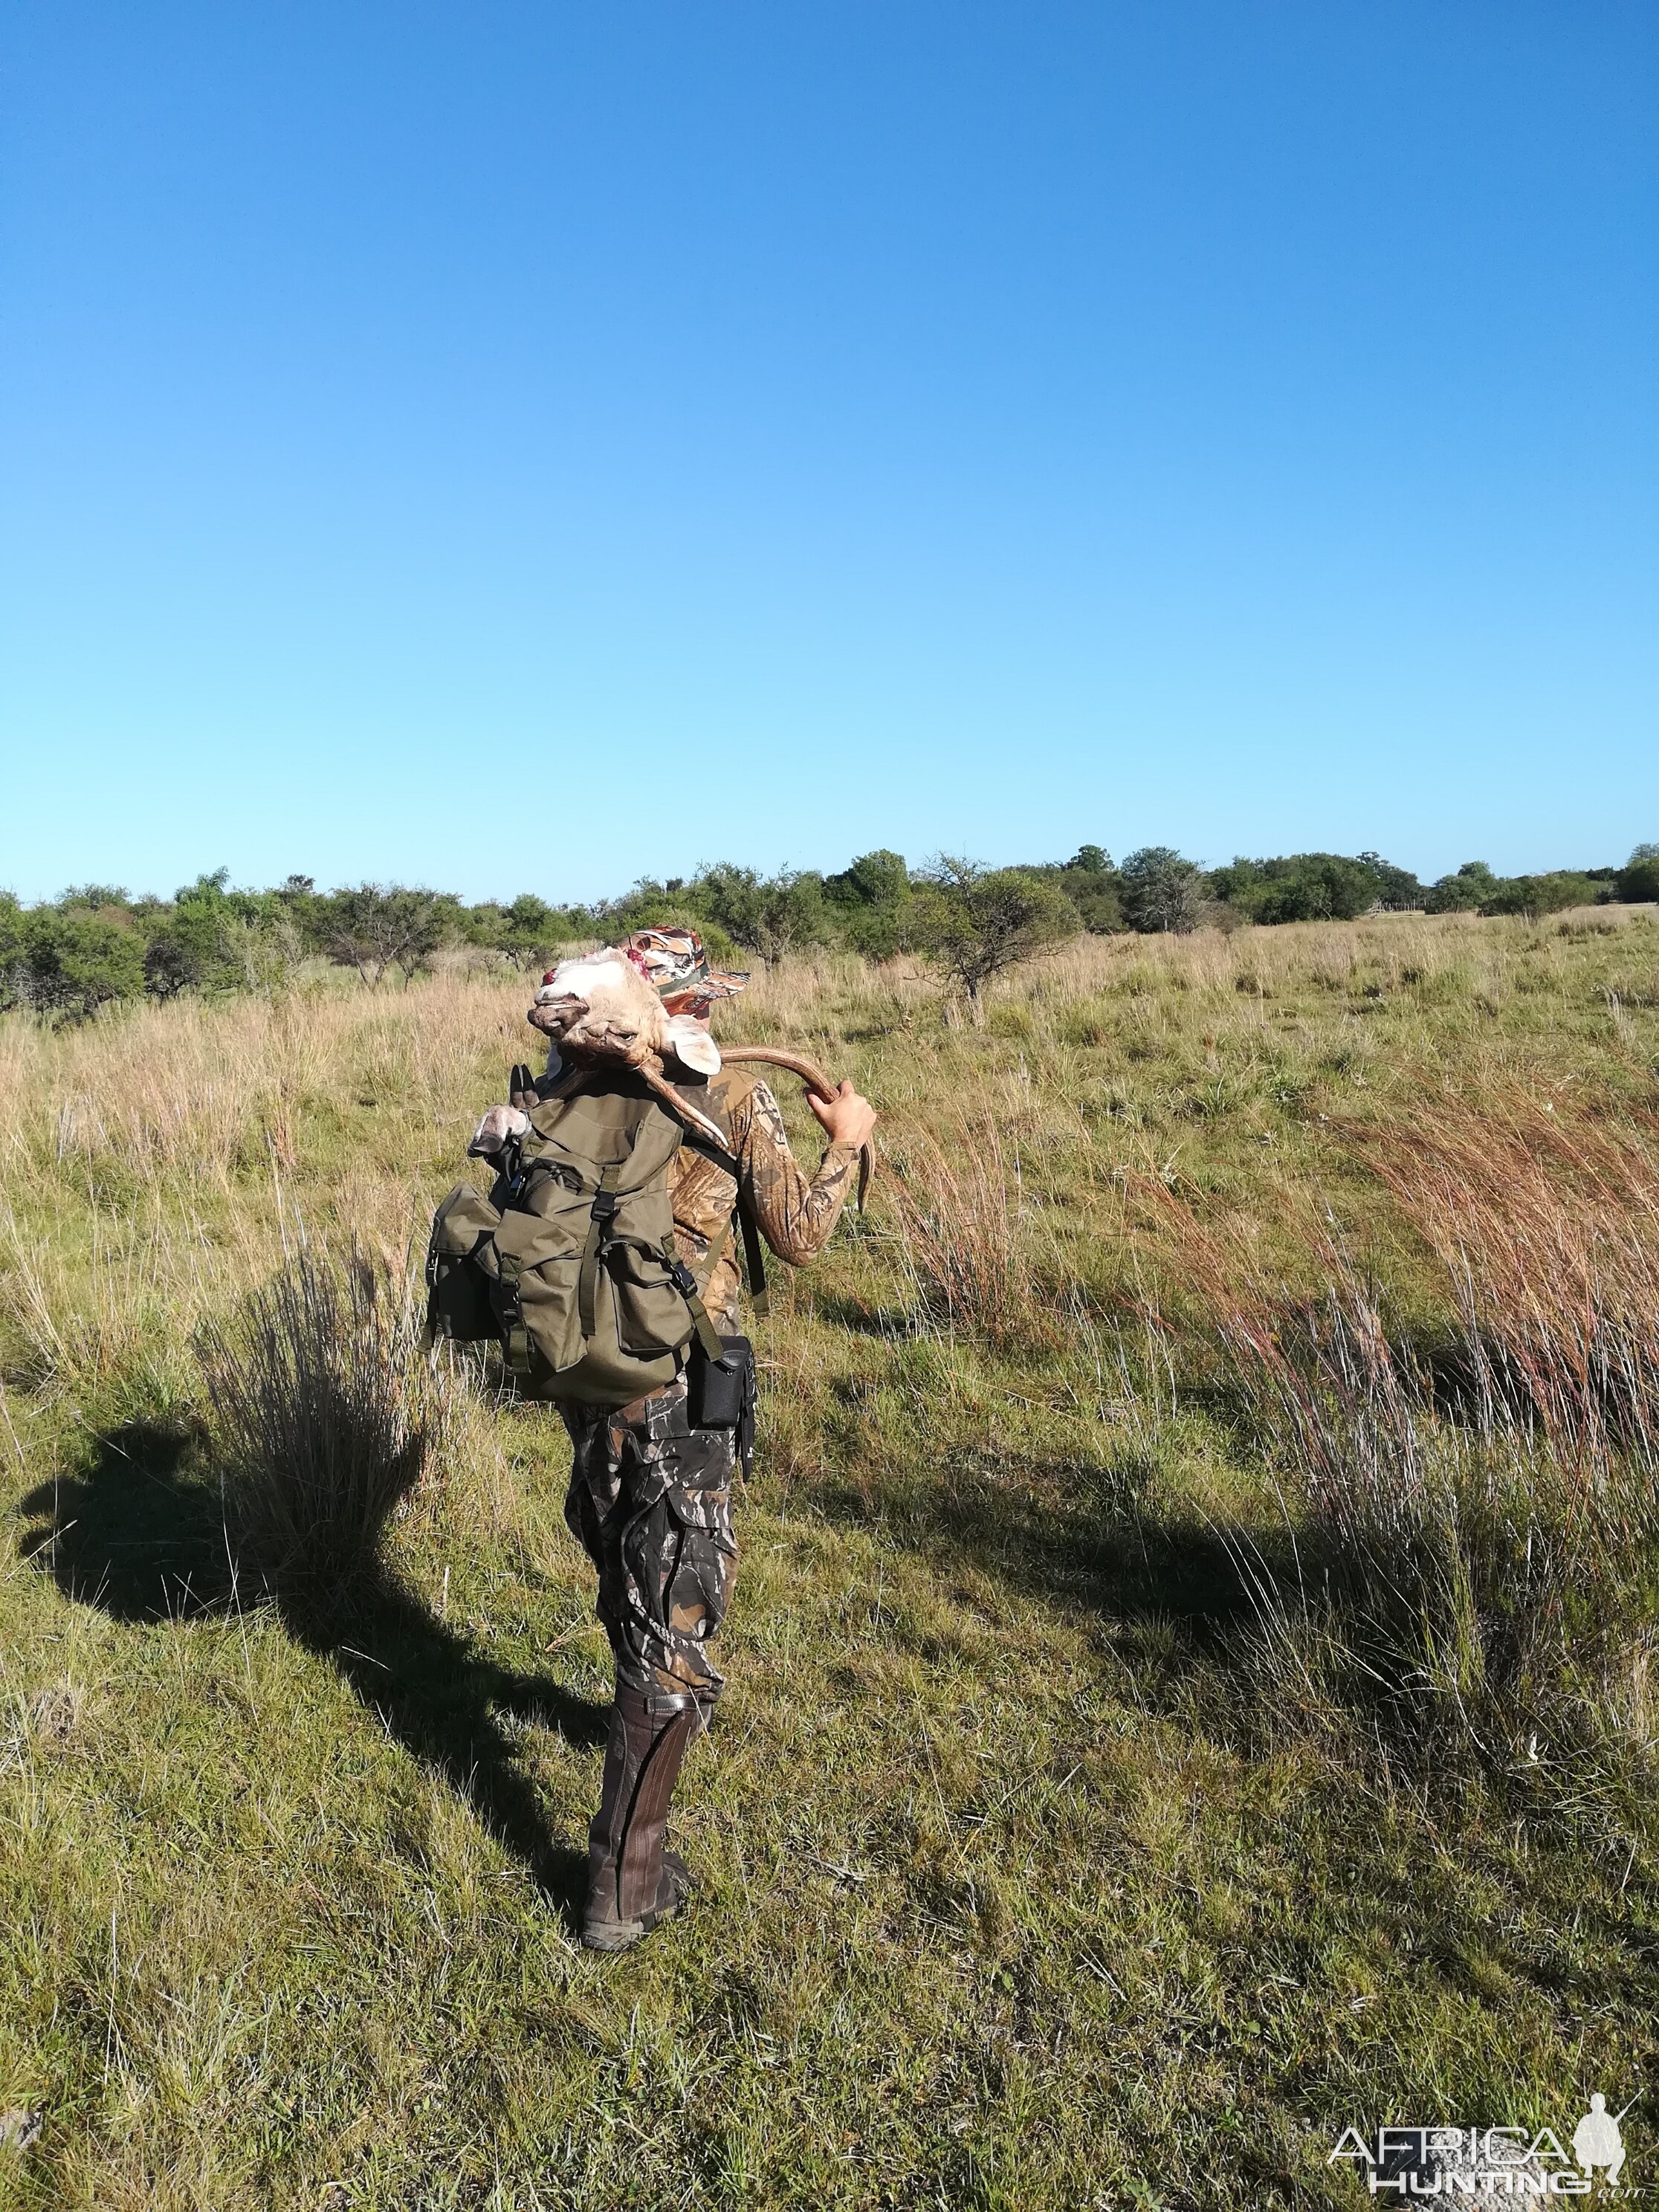 Hunting Axis Deer Argentina